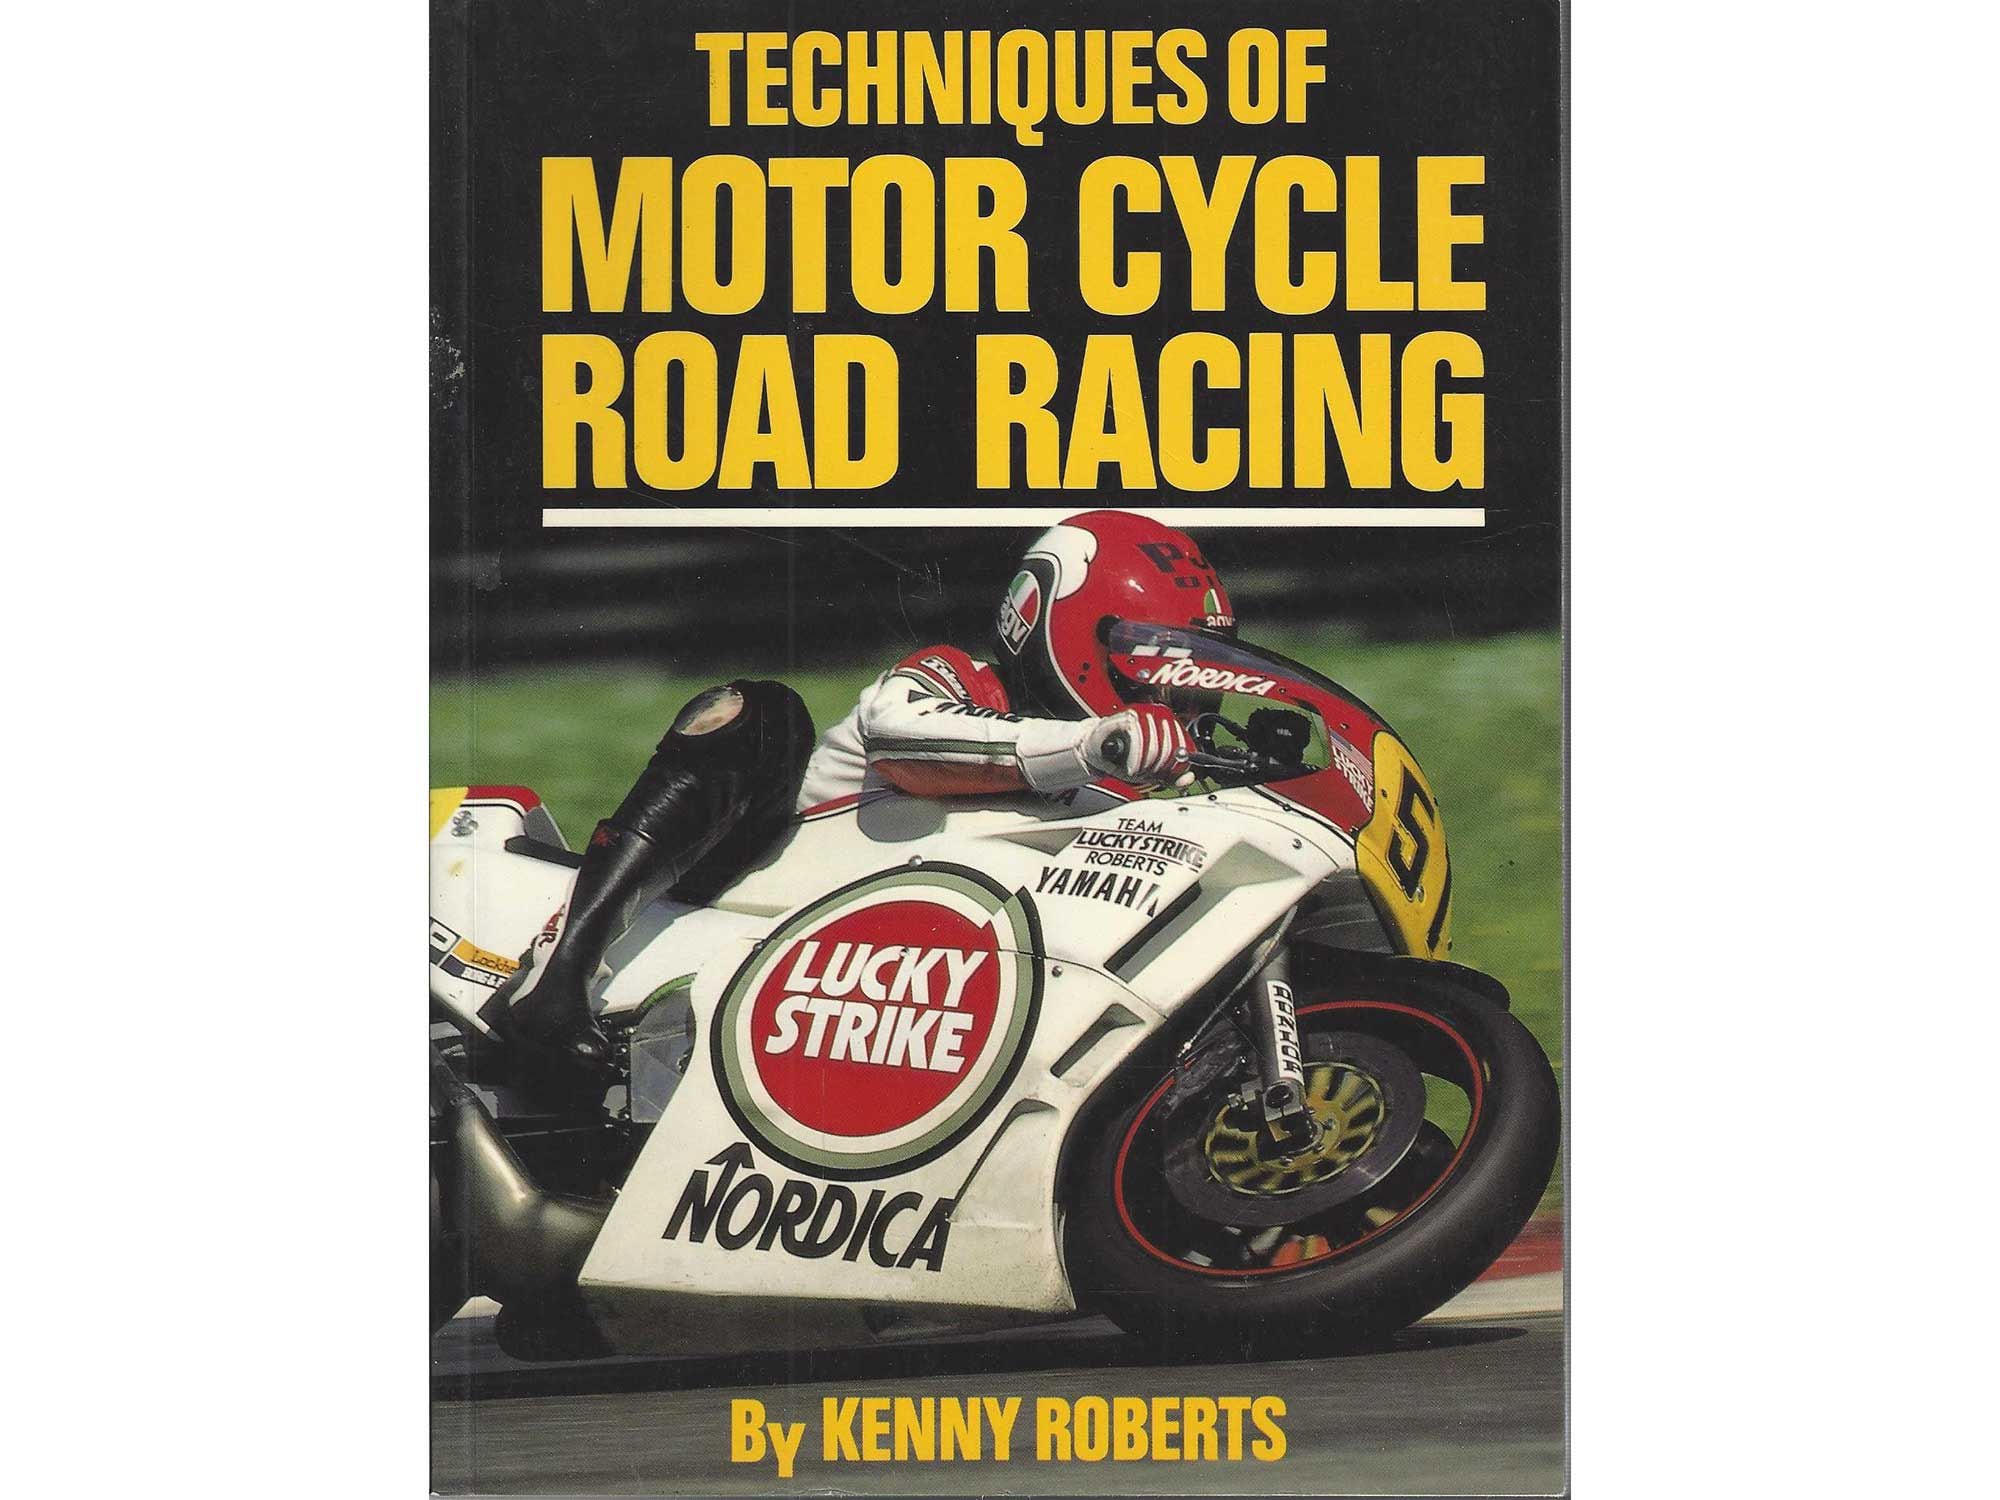 The beginning of every Yamaha Champions Riding School begins with a quote from this book.